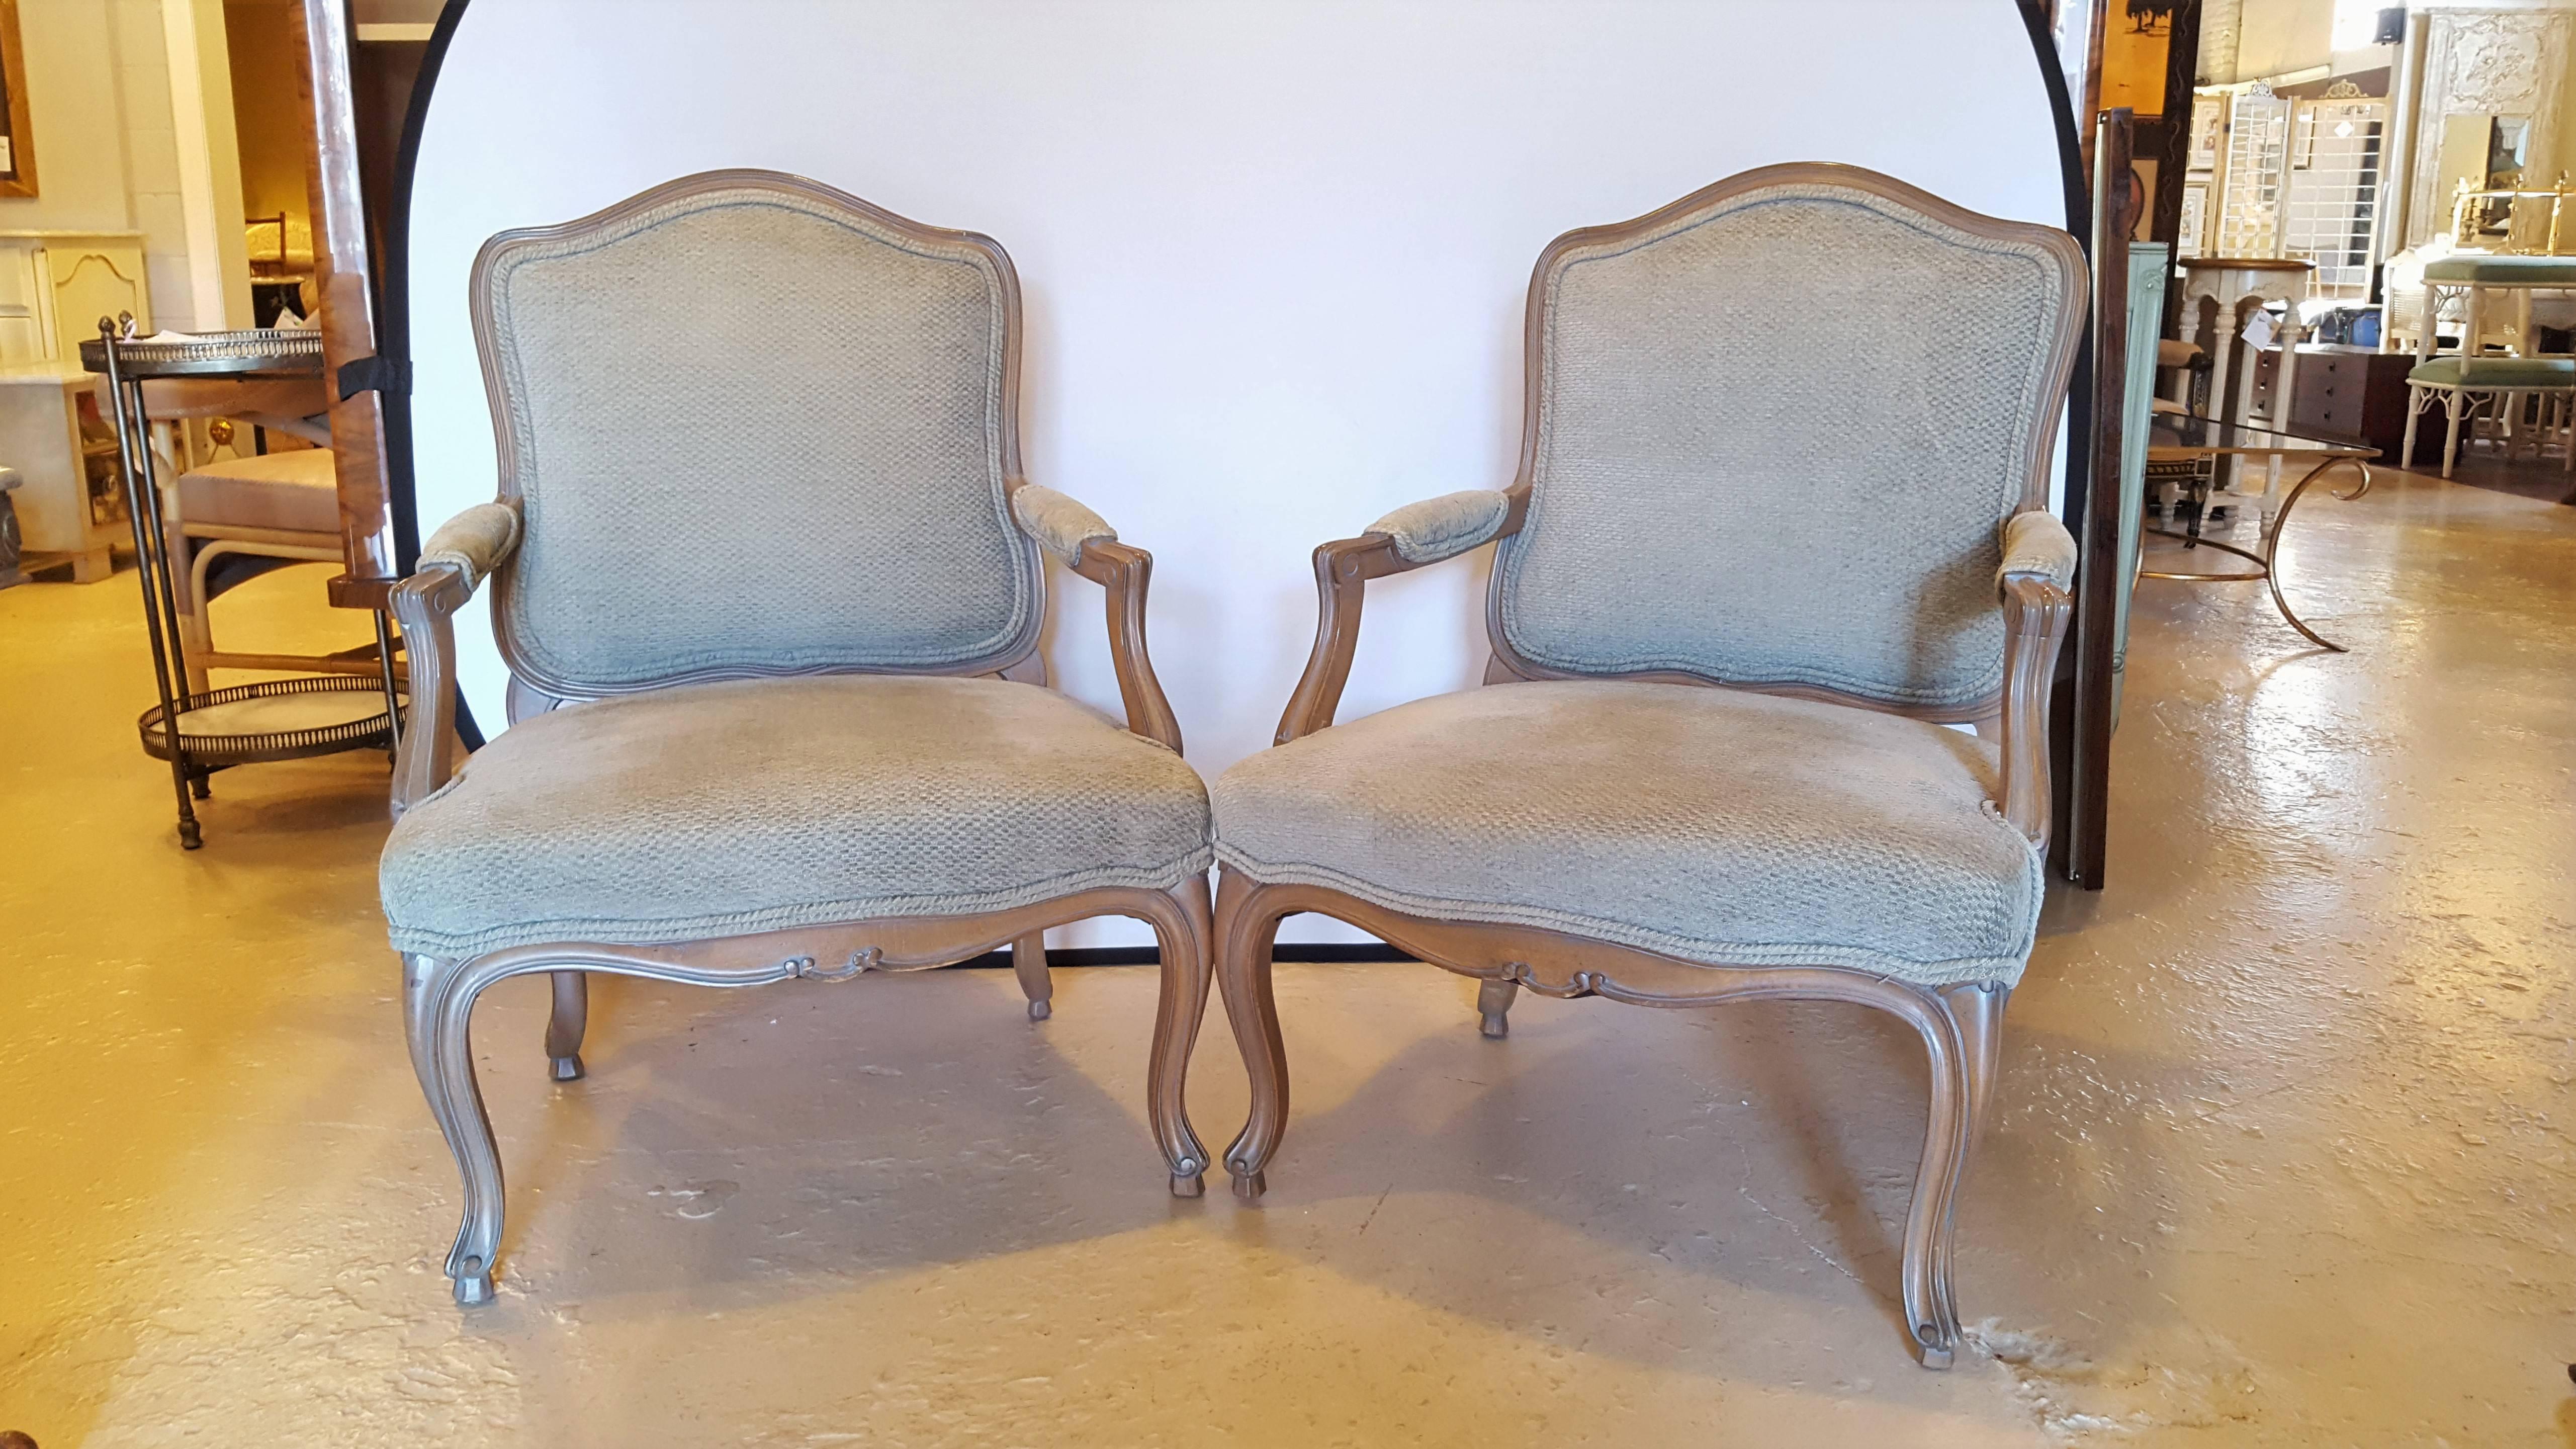 A fine set of four Beechwood Fauteuils. Beautifully carved, in a Louis XV style. Would look great in any room or office.

Measures: Seat height - 18.5 inches.

One is $1,000 NET.